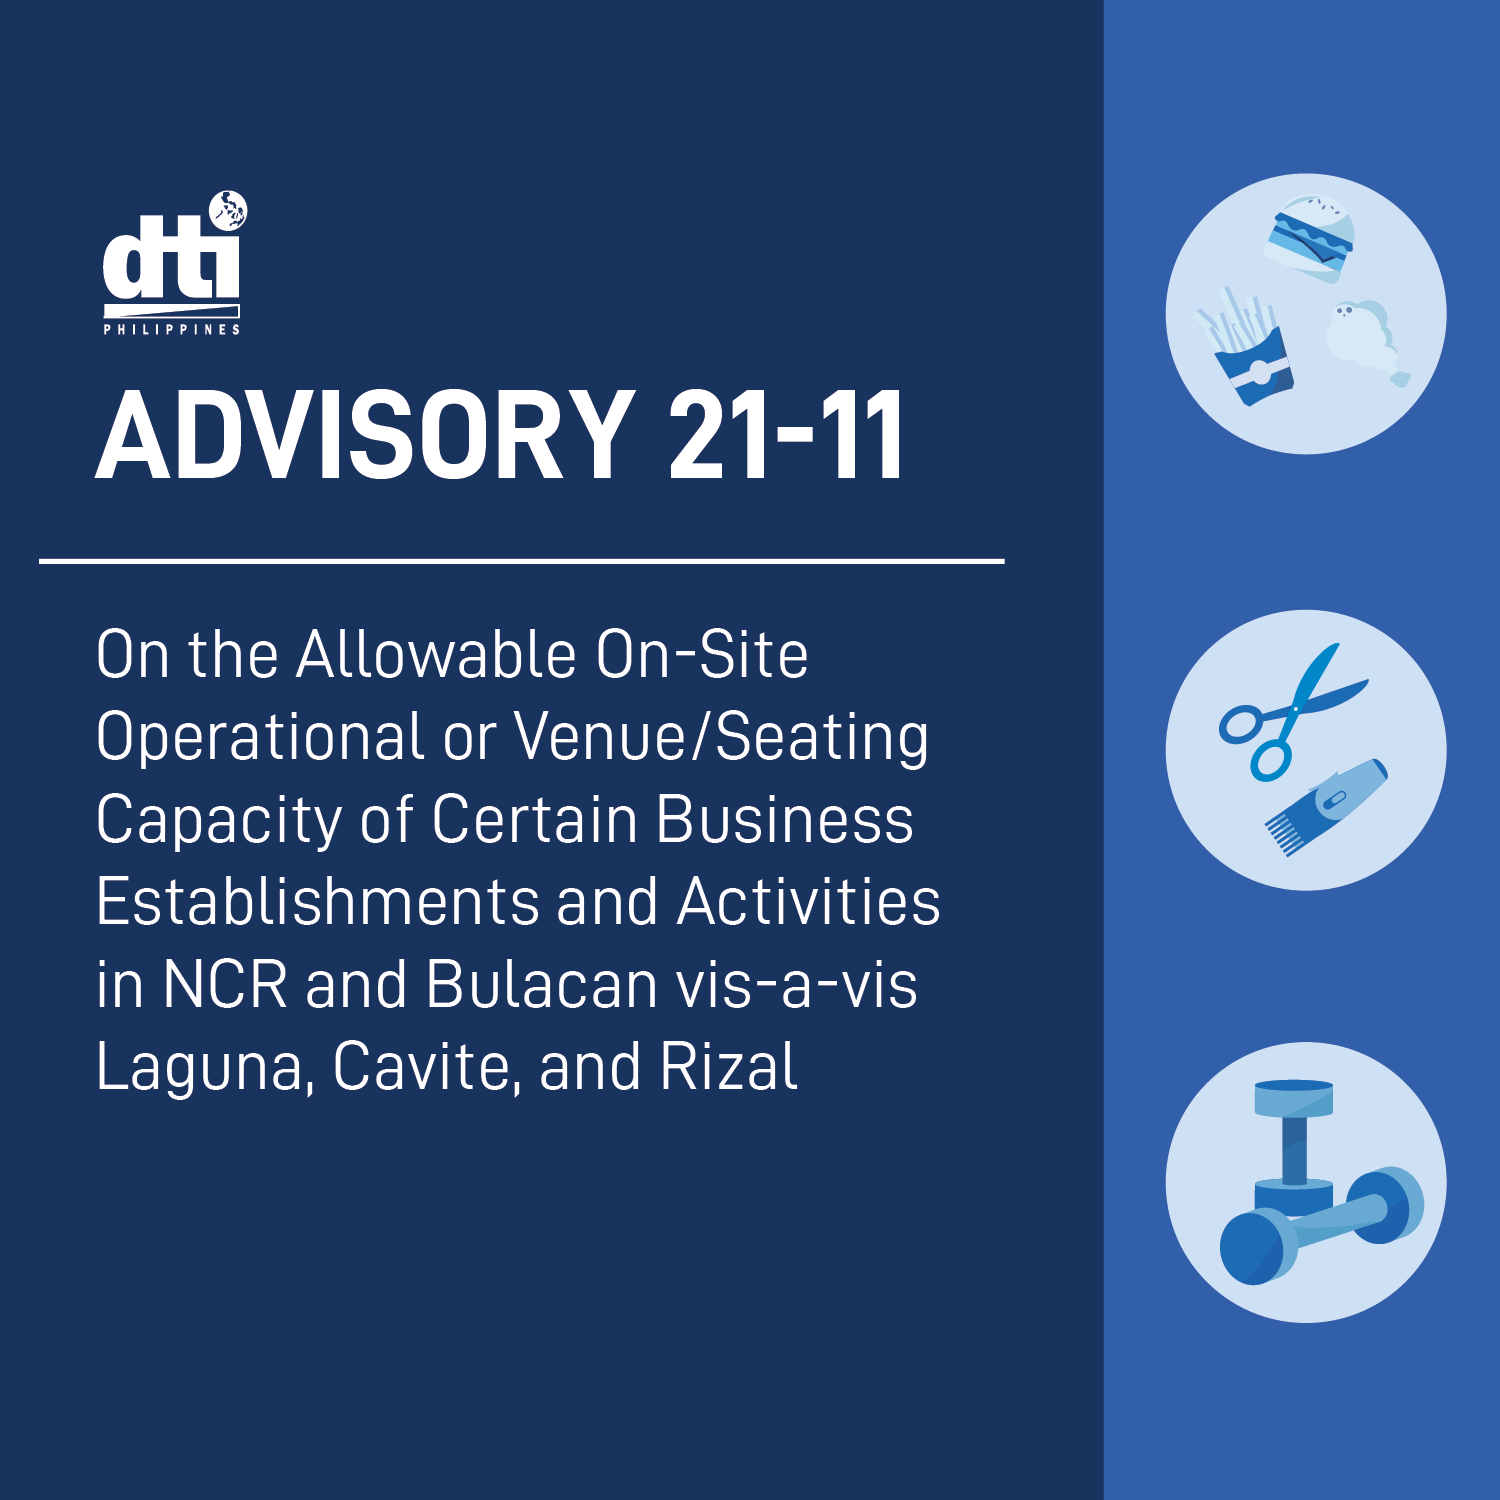 DTI Advisory 21-11: On the Allowable On-site Operational or Venue/seating Capacity of Certain Business Establishments and Activities in NCR and Bulacan vis-a-vis Laguna, Cavite, and Rizal